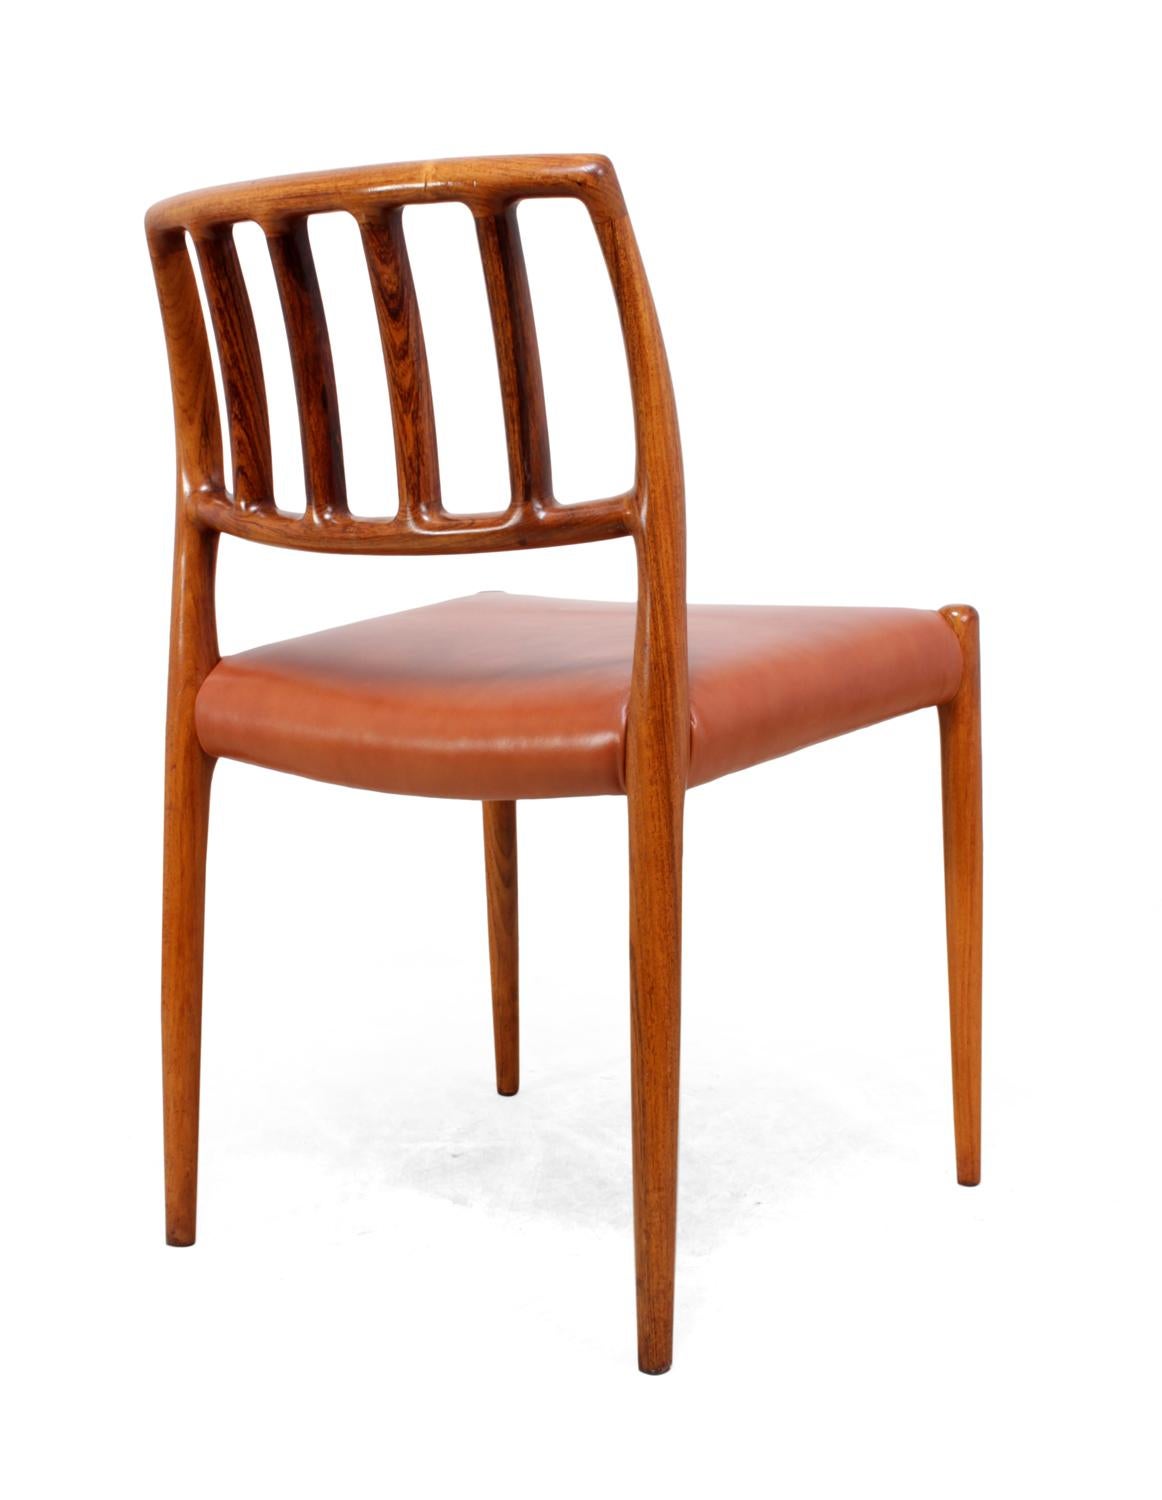 Late 20th Century Midcentury Rosewood Dining Chairs by Moller Model 83